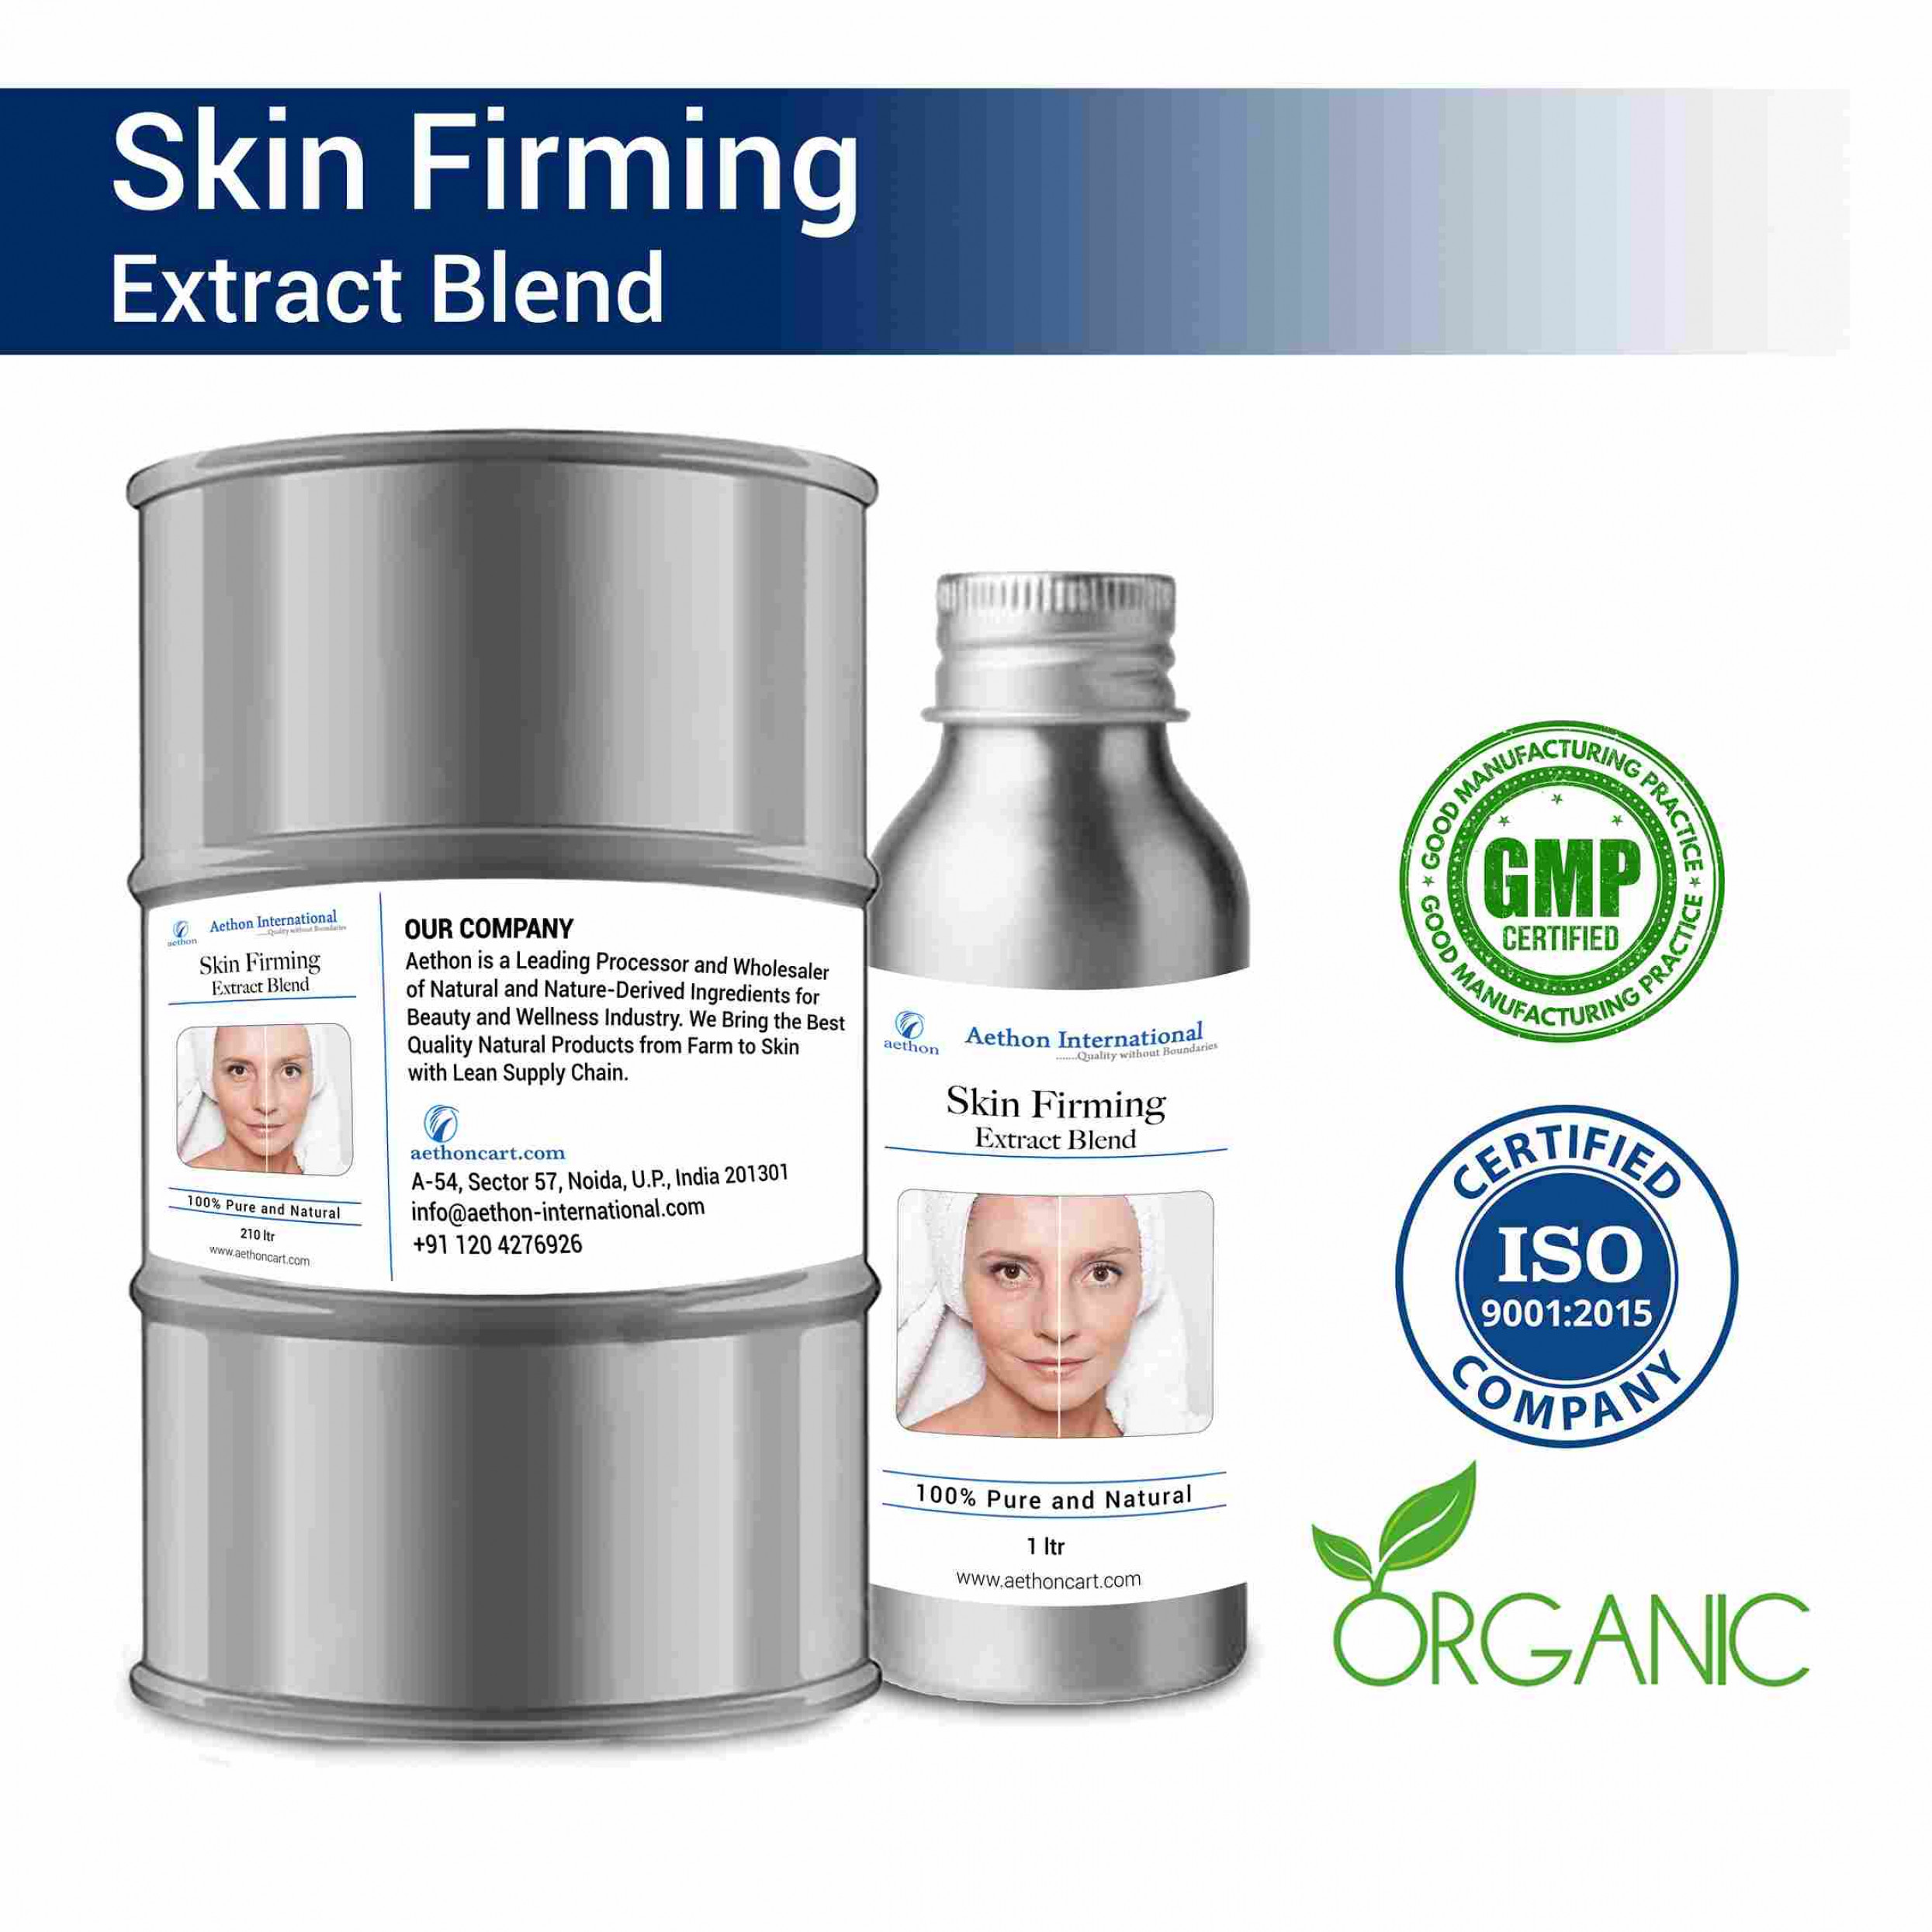 Skin Firming Extract Blend (Oil)